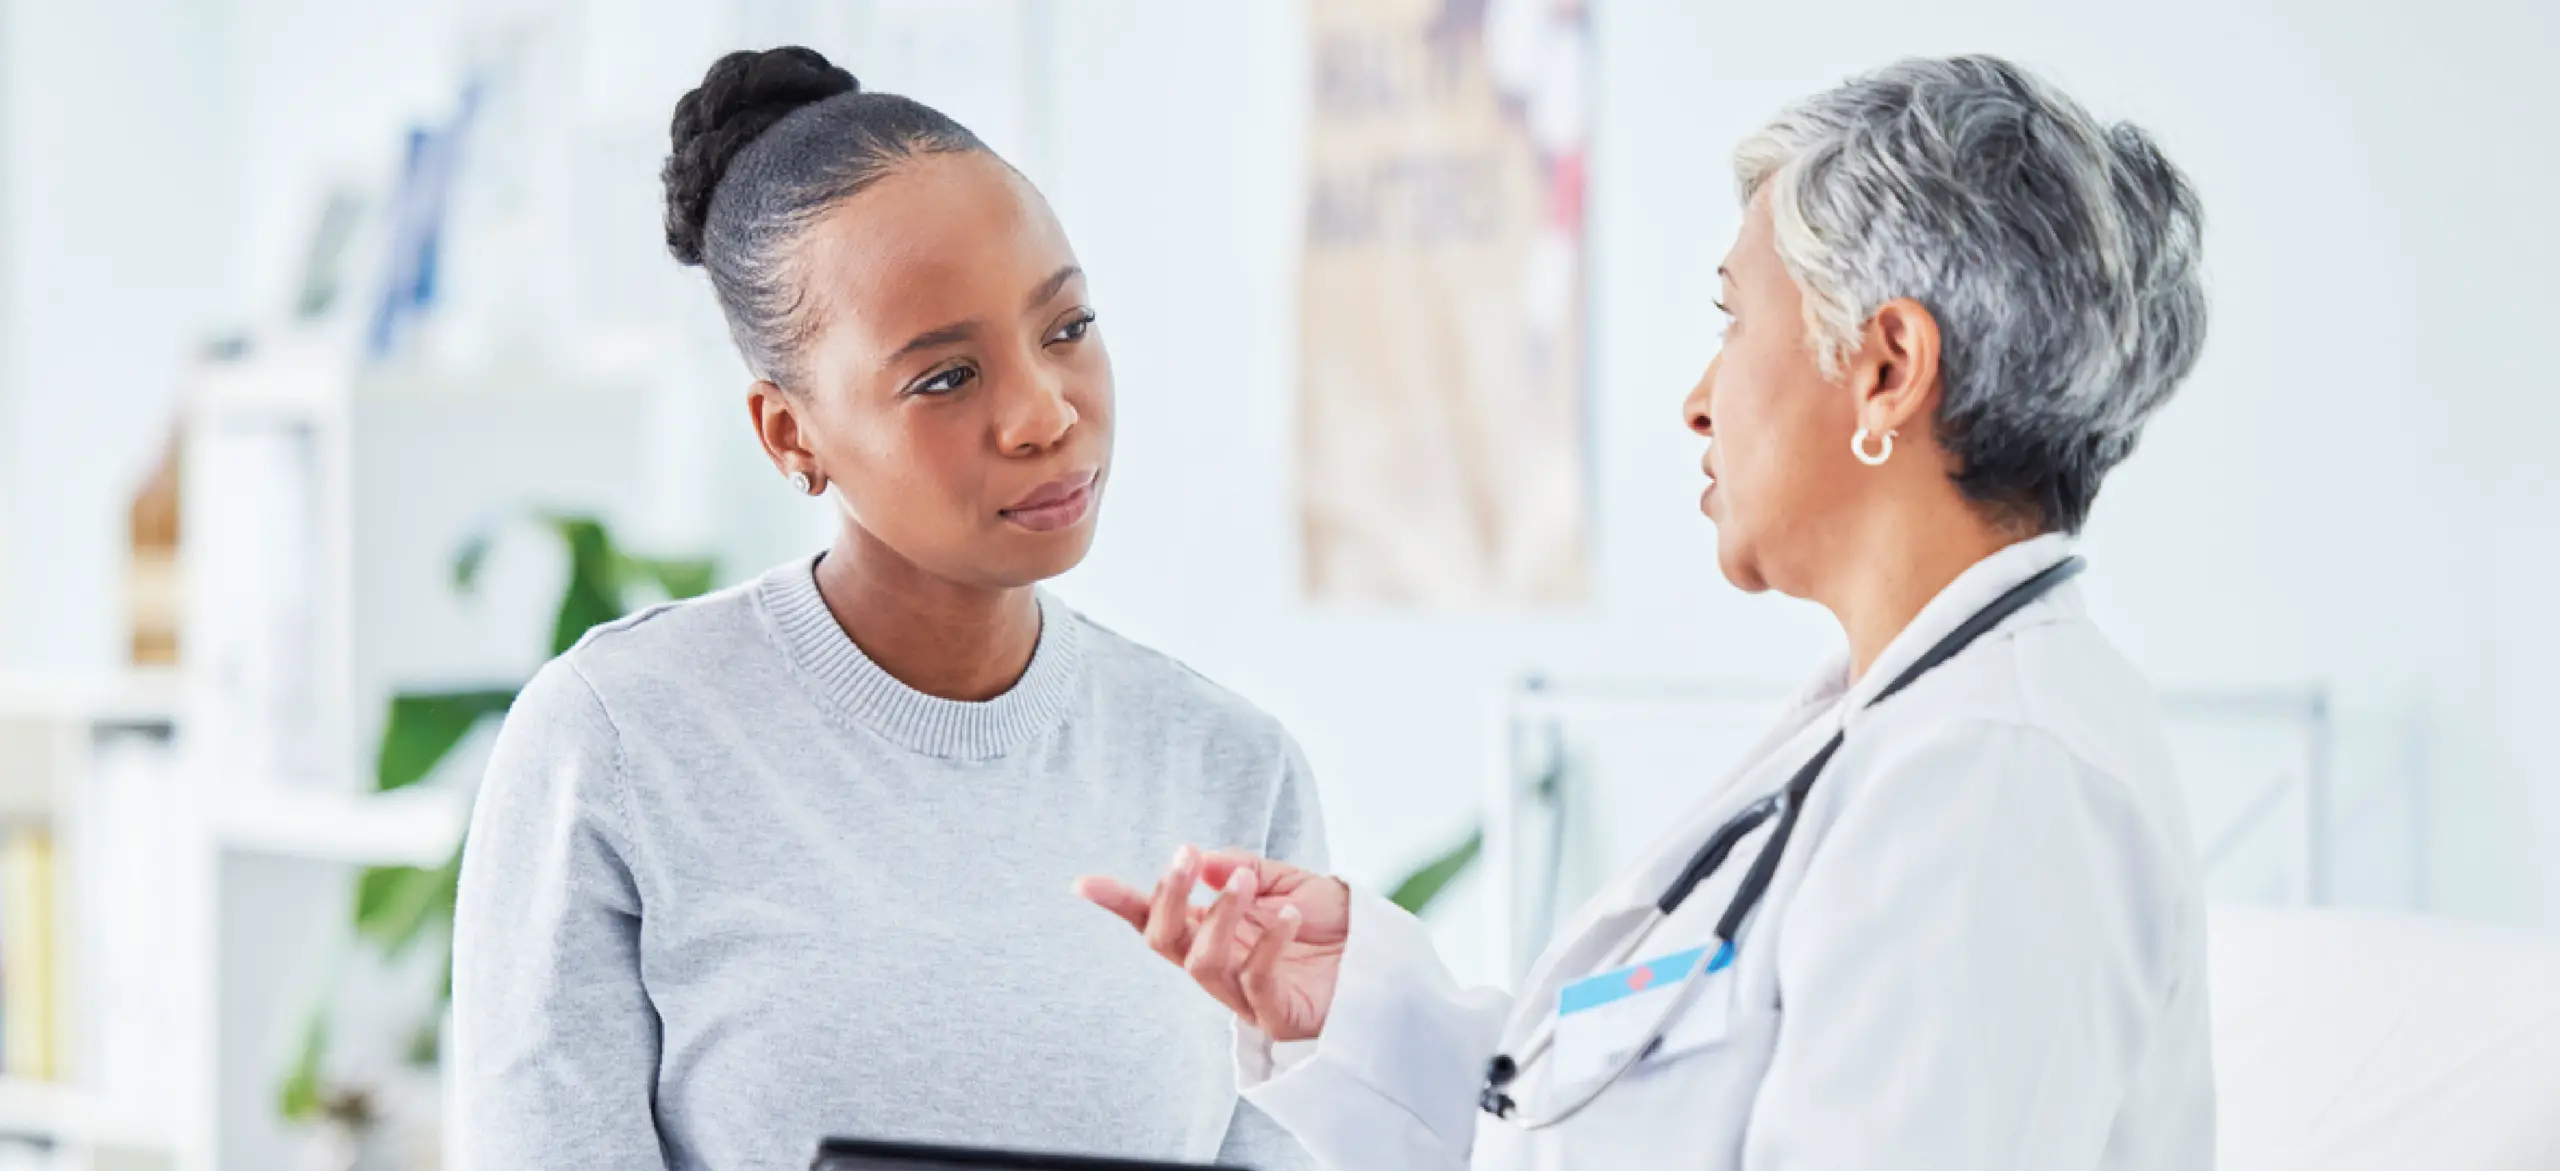 Patient payment options - A female doctor explaining payment options to a female patient.
